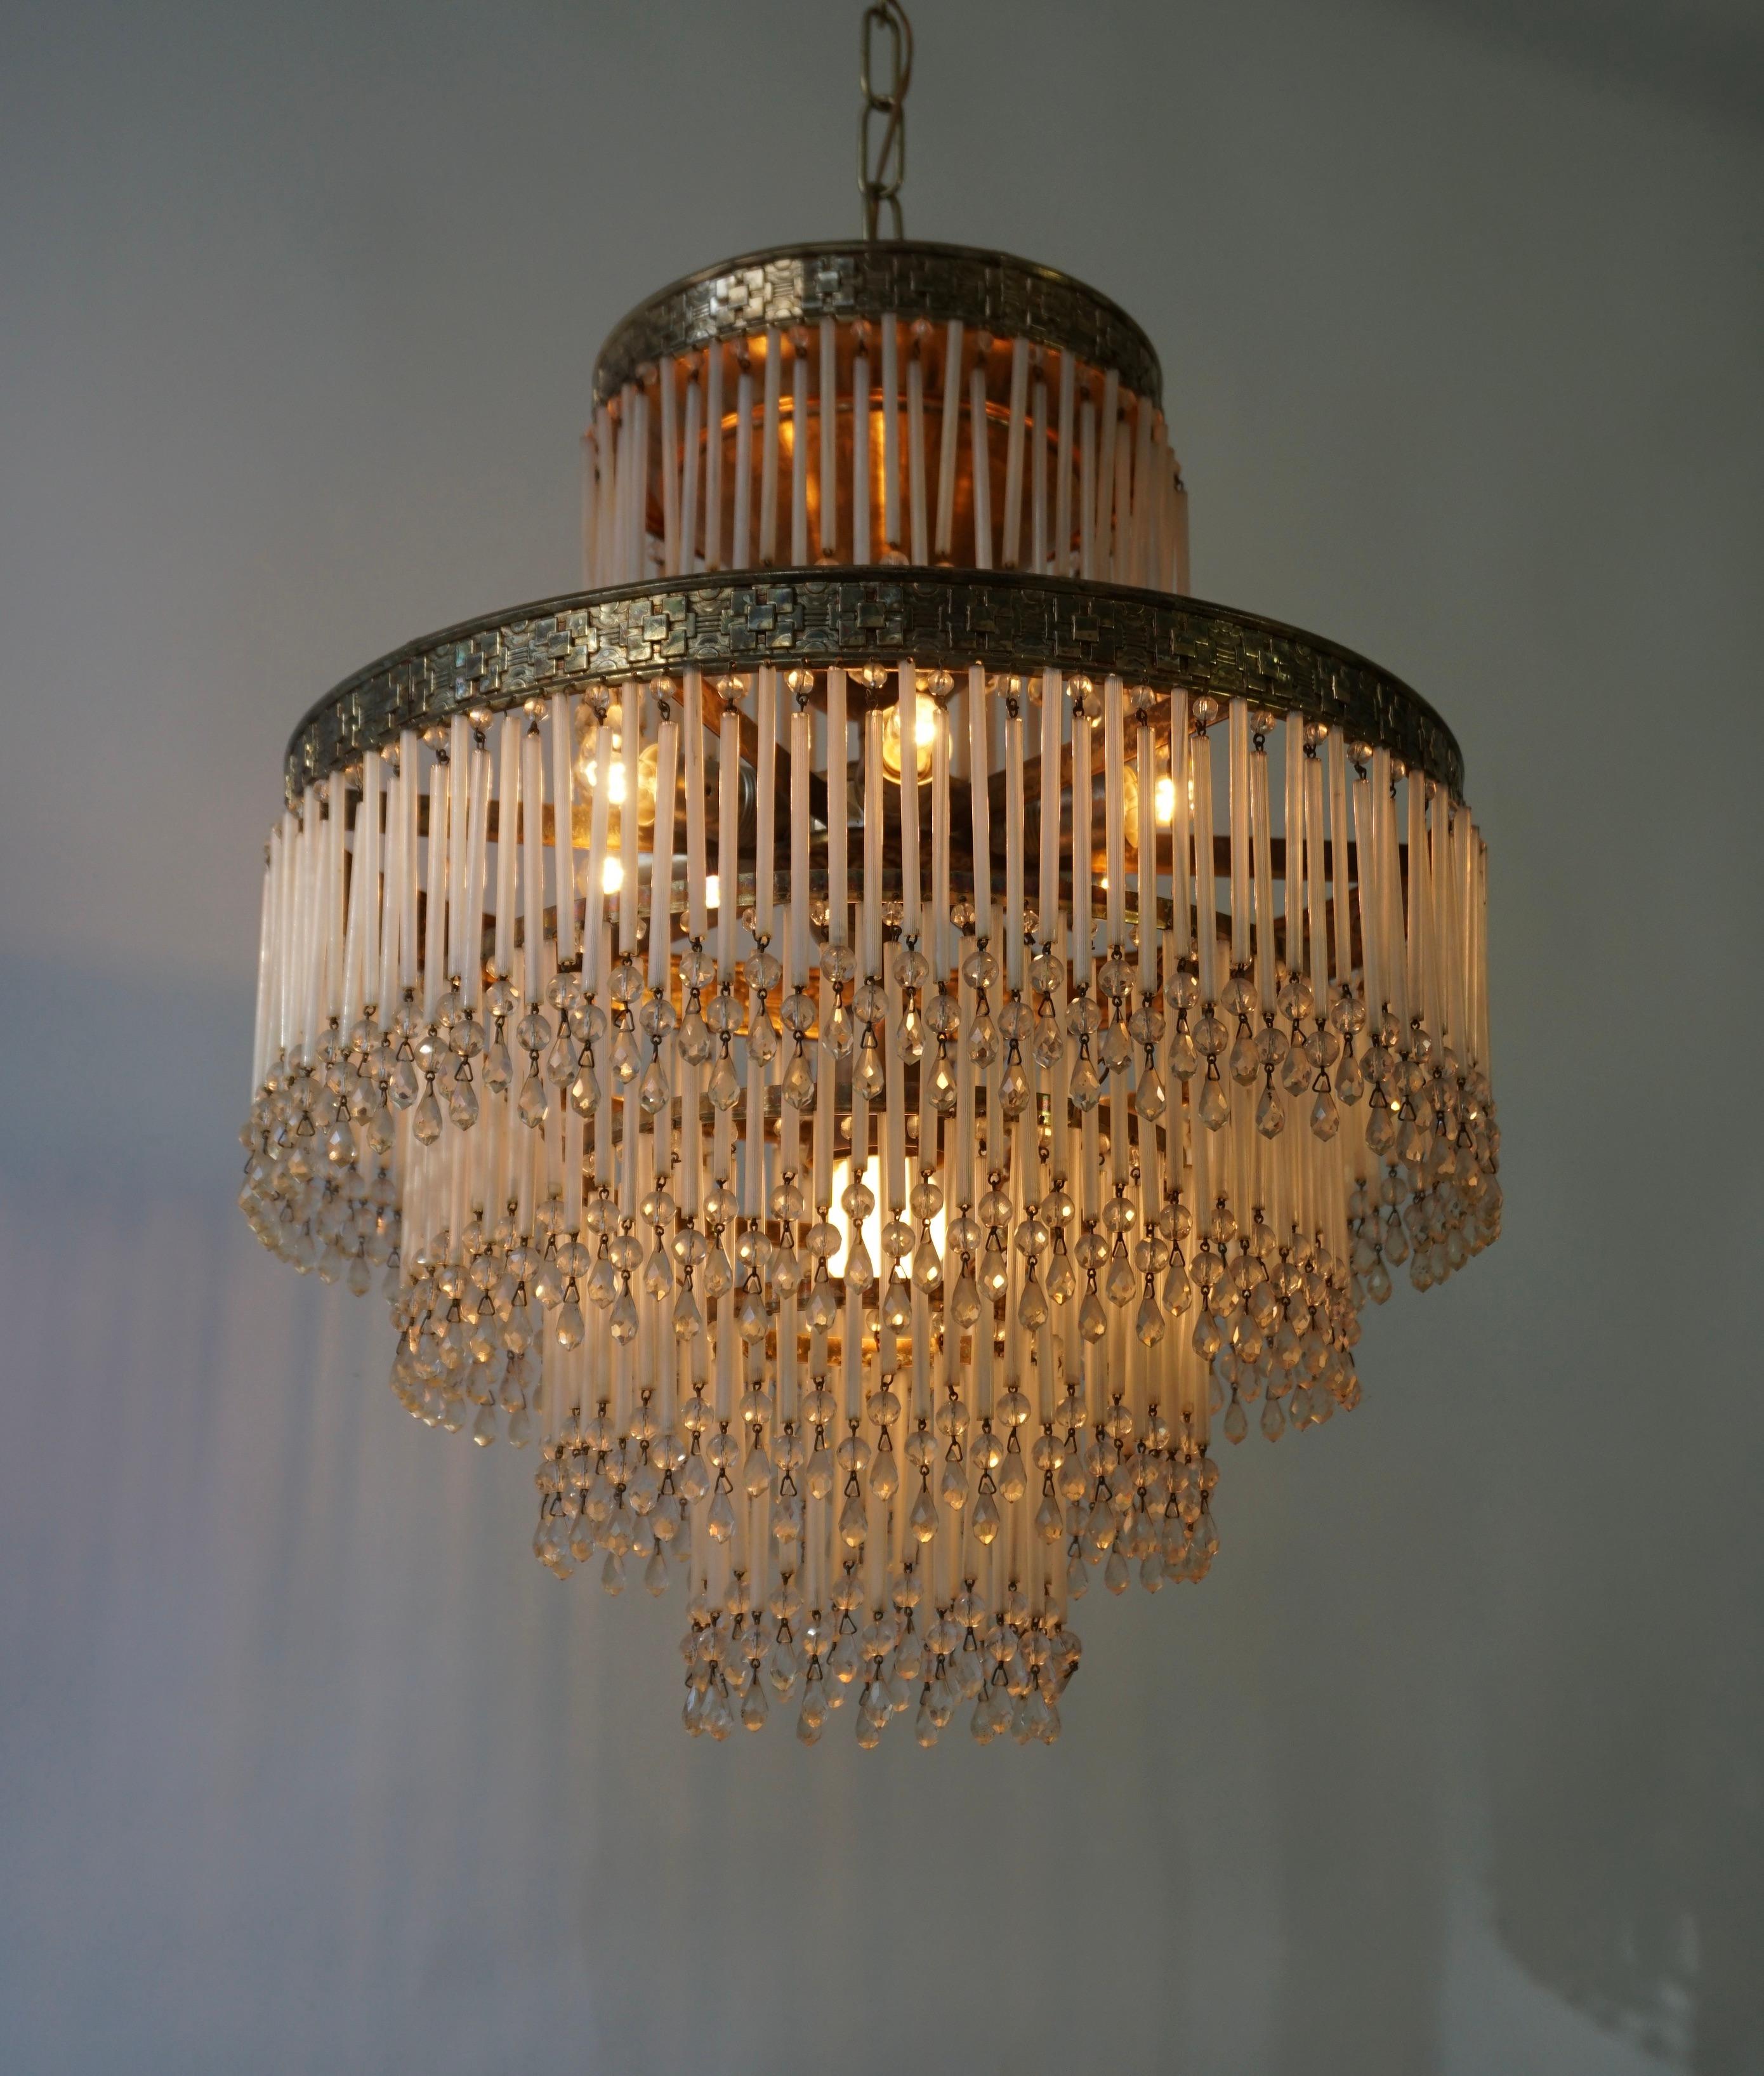 Beautiful Italian opalescent Hollywood vintage regency hanging lamp with rods and transparent crystal beads.

Fantastic effect due to the multiple layers of glass rods. The frame has a special motif that beautifully reflects the time in which this